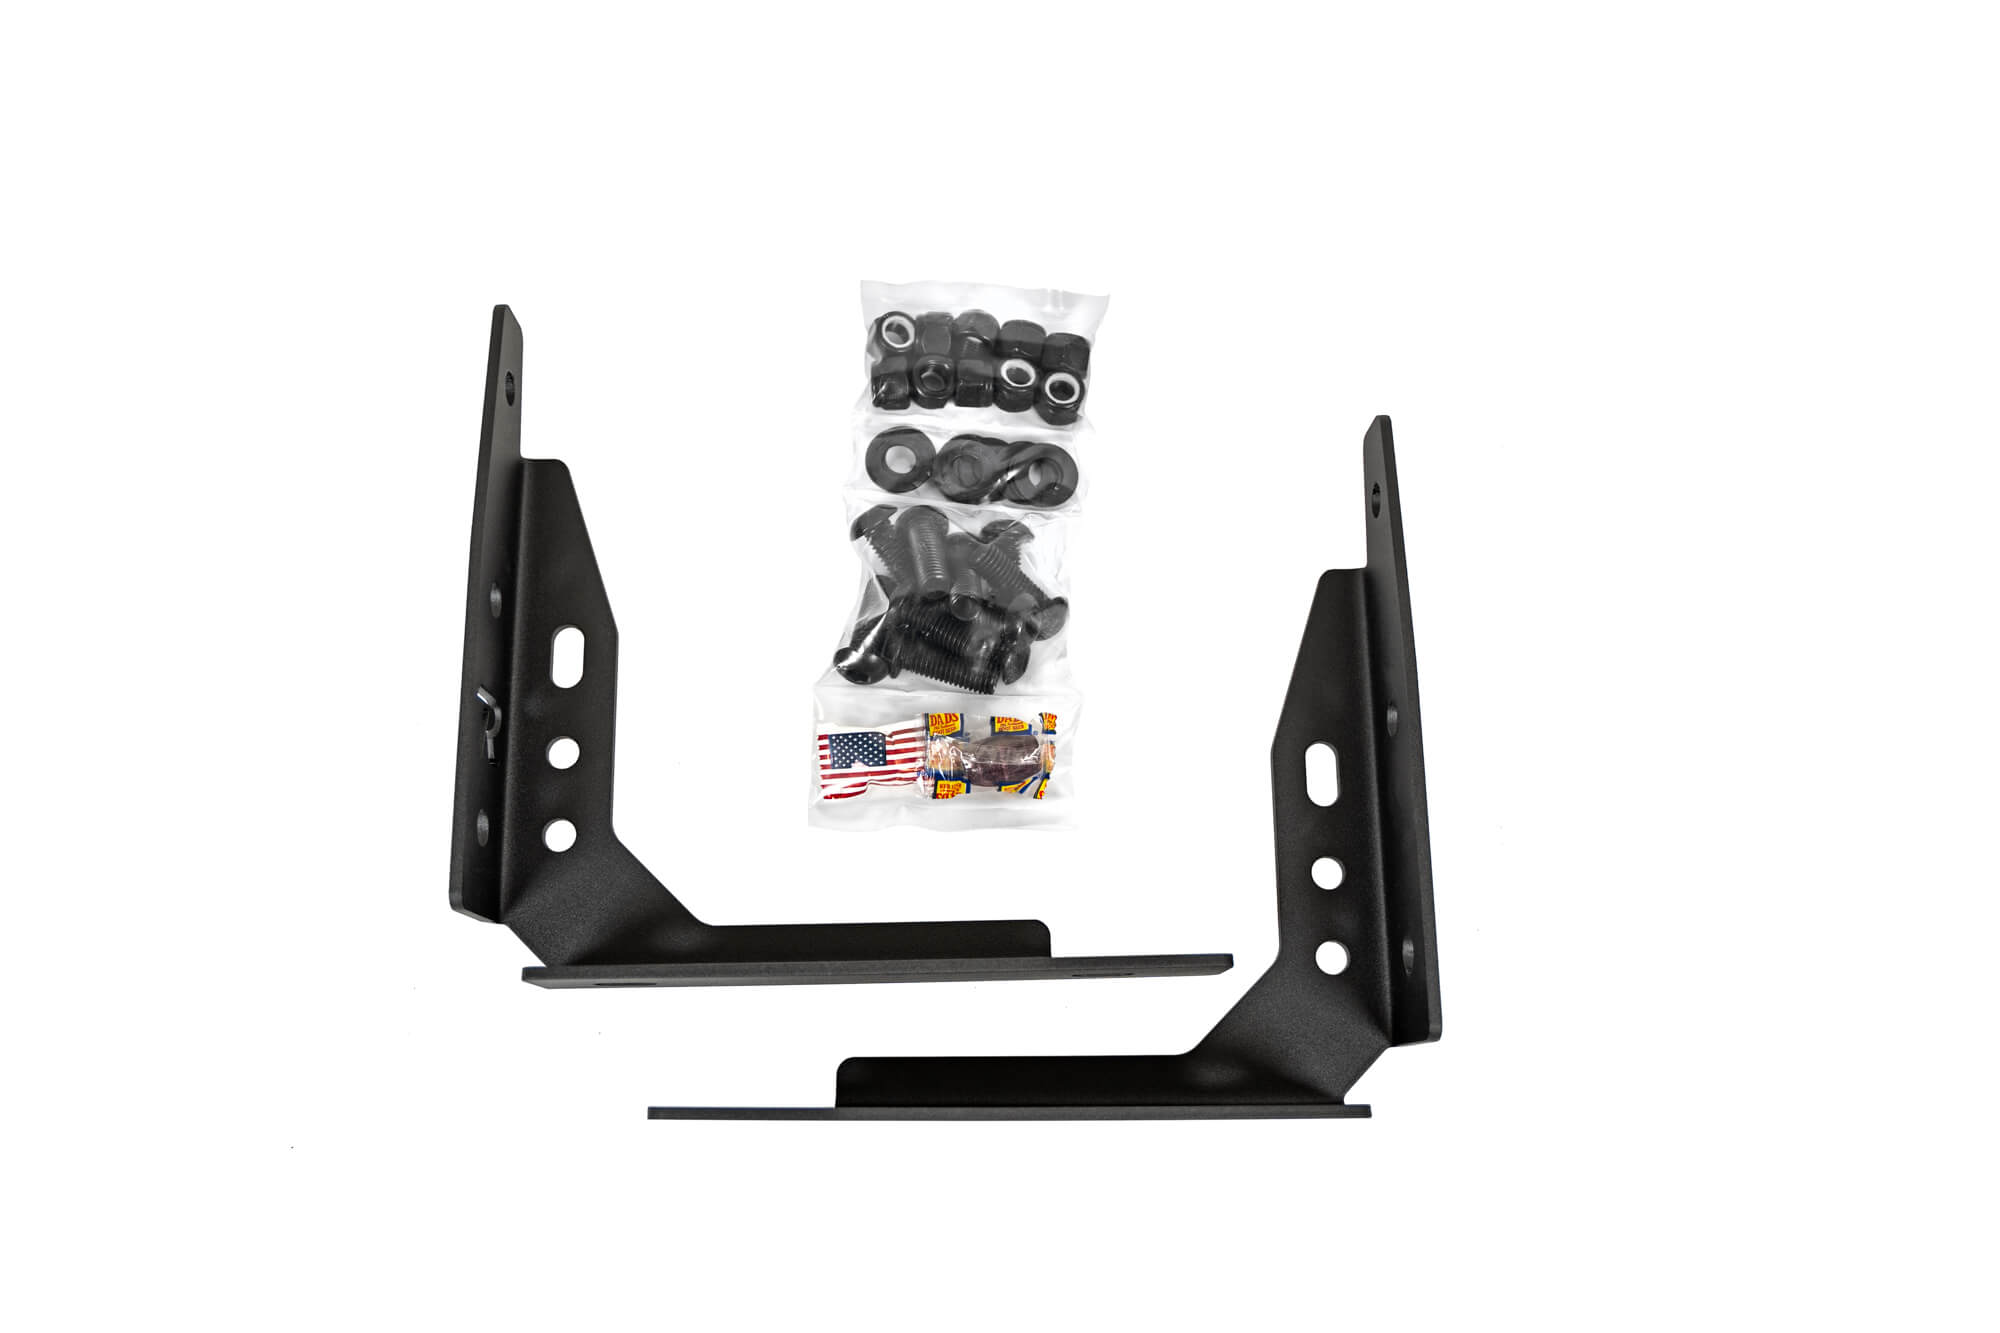 Toyota Tacoma Pair of Bed Channel Stiffeners, included parts and hardware